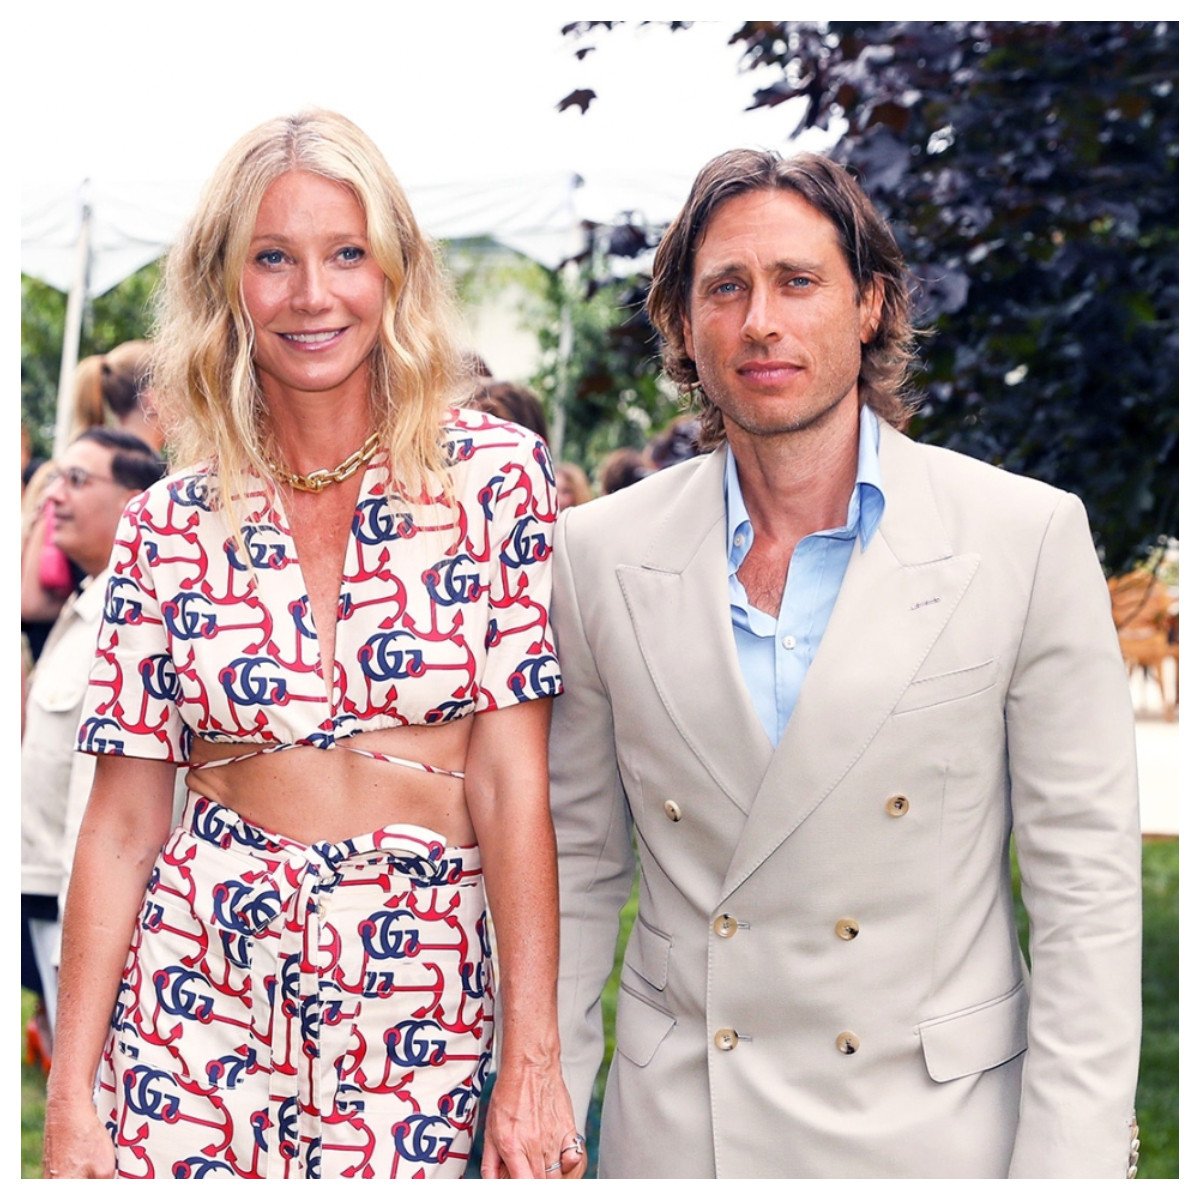 Gwyneth Paltrow and her hubby Brad Falchuk at a Goop x Gucci garden party this summer. Photo: @hollywoodlife/Instagram